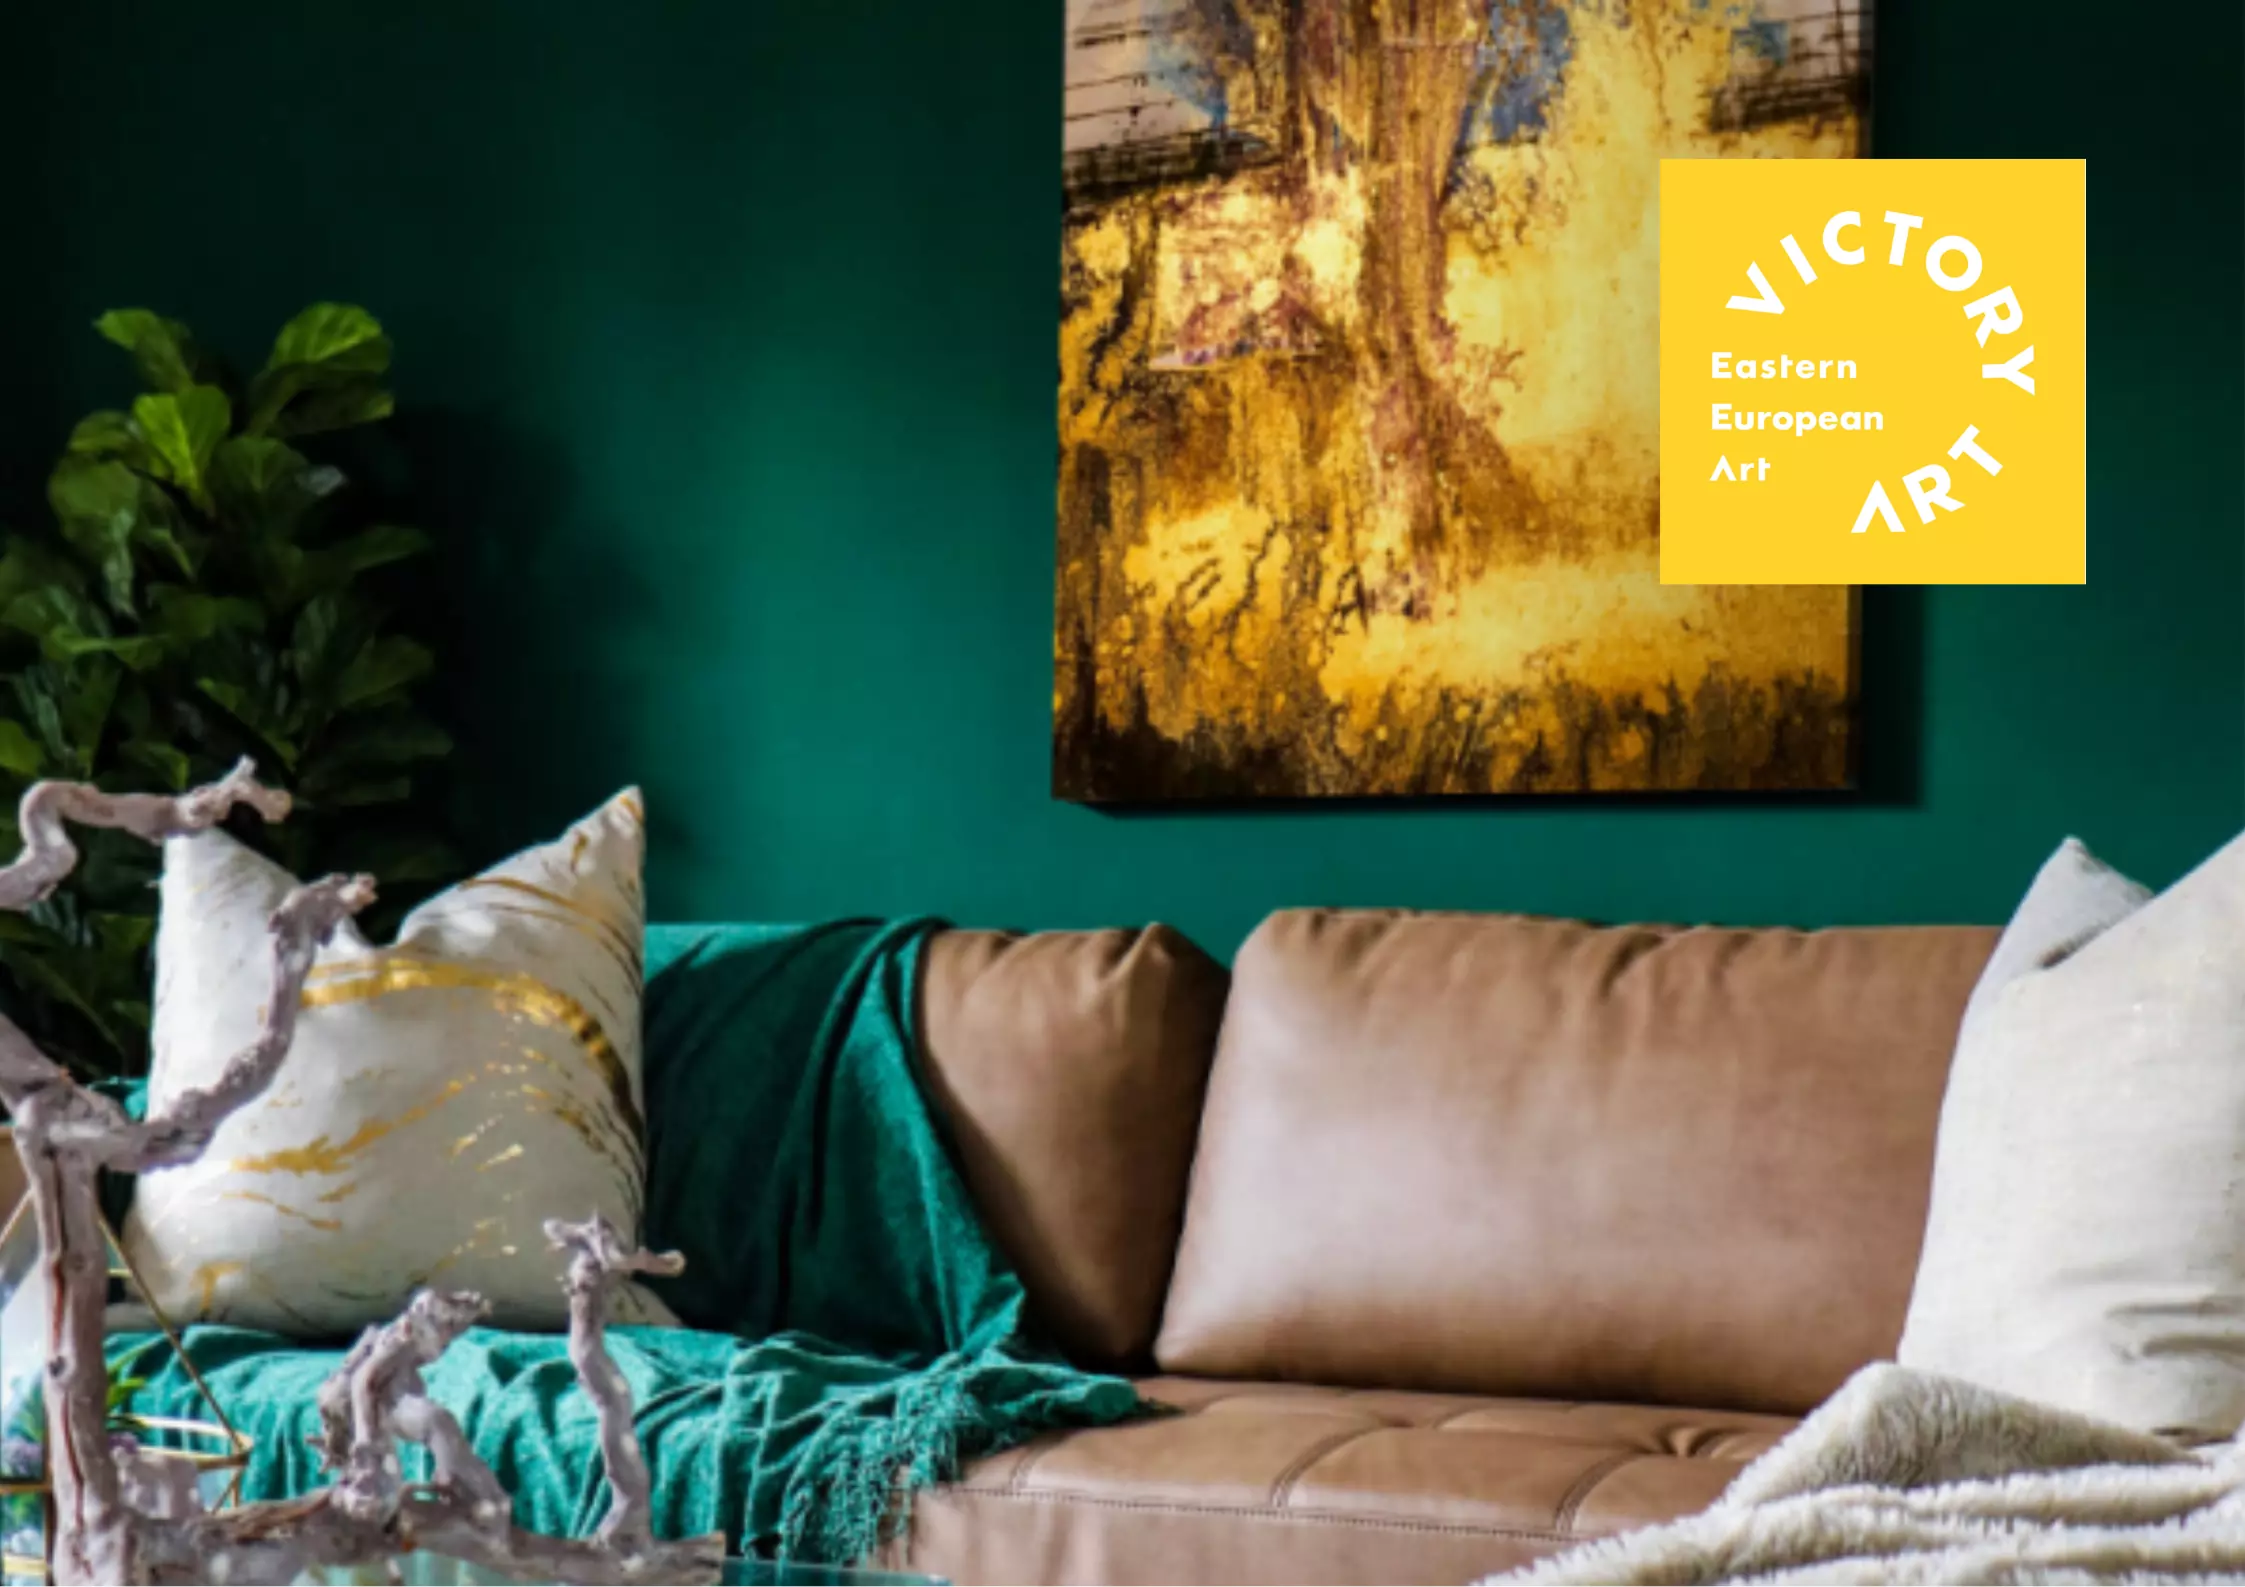 Greenspiration: How a Green Colour Palette Can Brighten Up Your Home